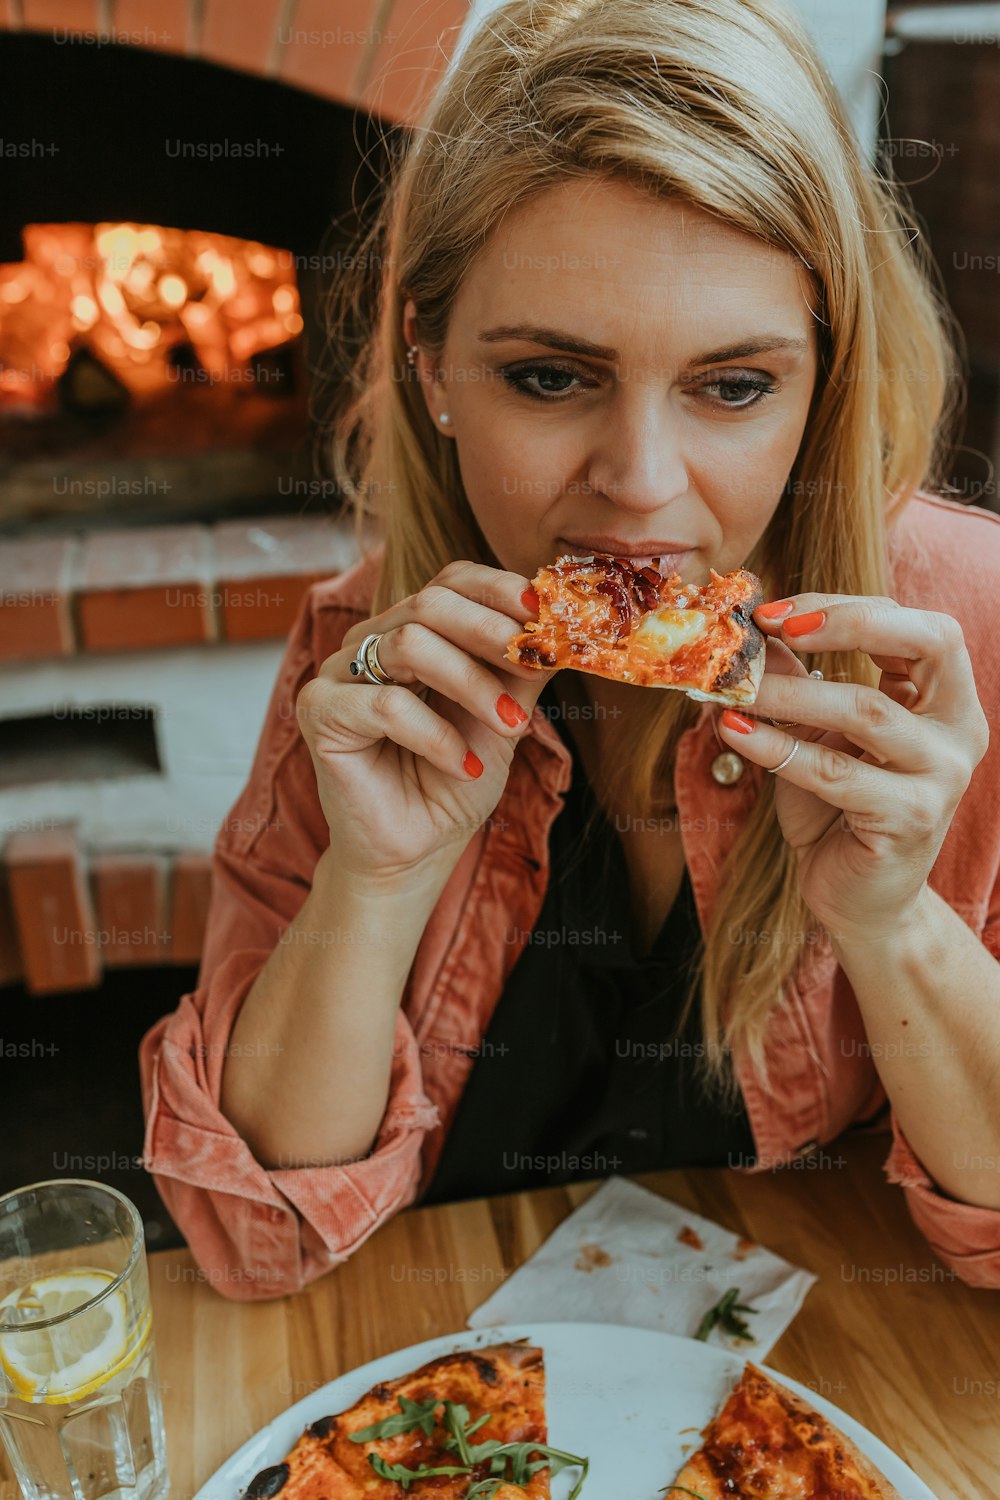 a woman sitting at a table eating a slice of pizza